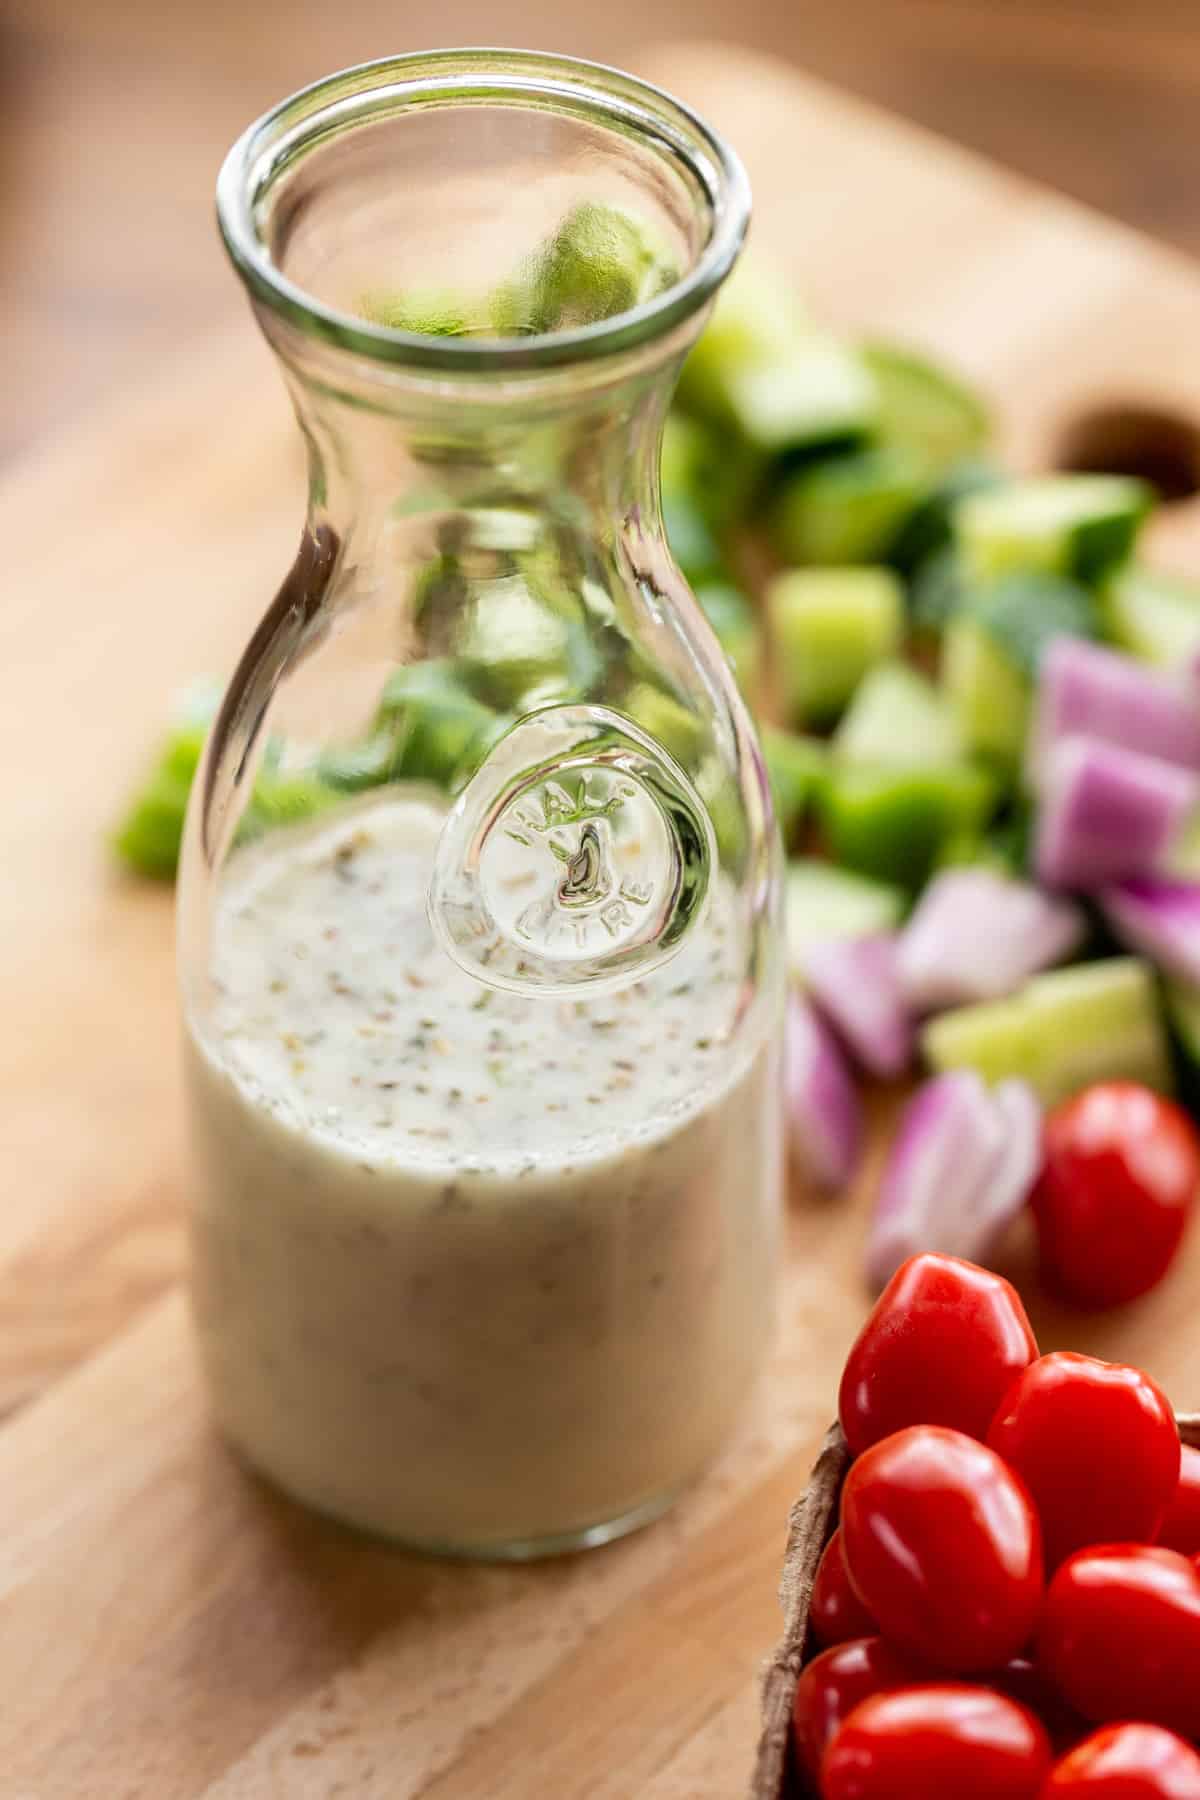 A bottle of Greek salad dressing and fresh vegetables on a wood cutting board.